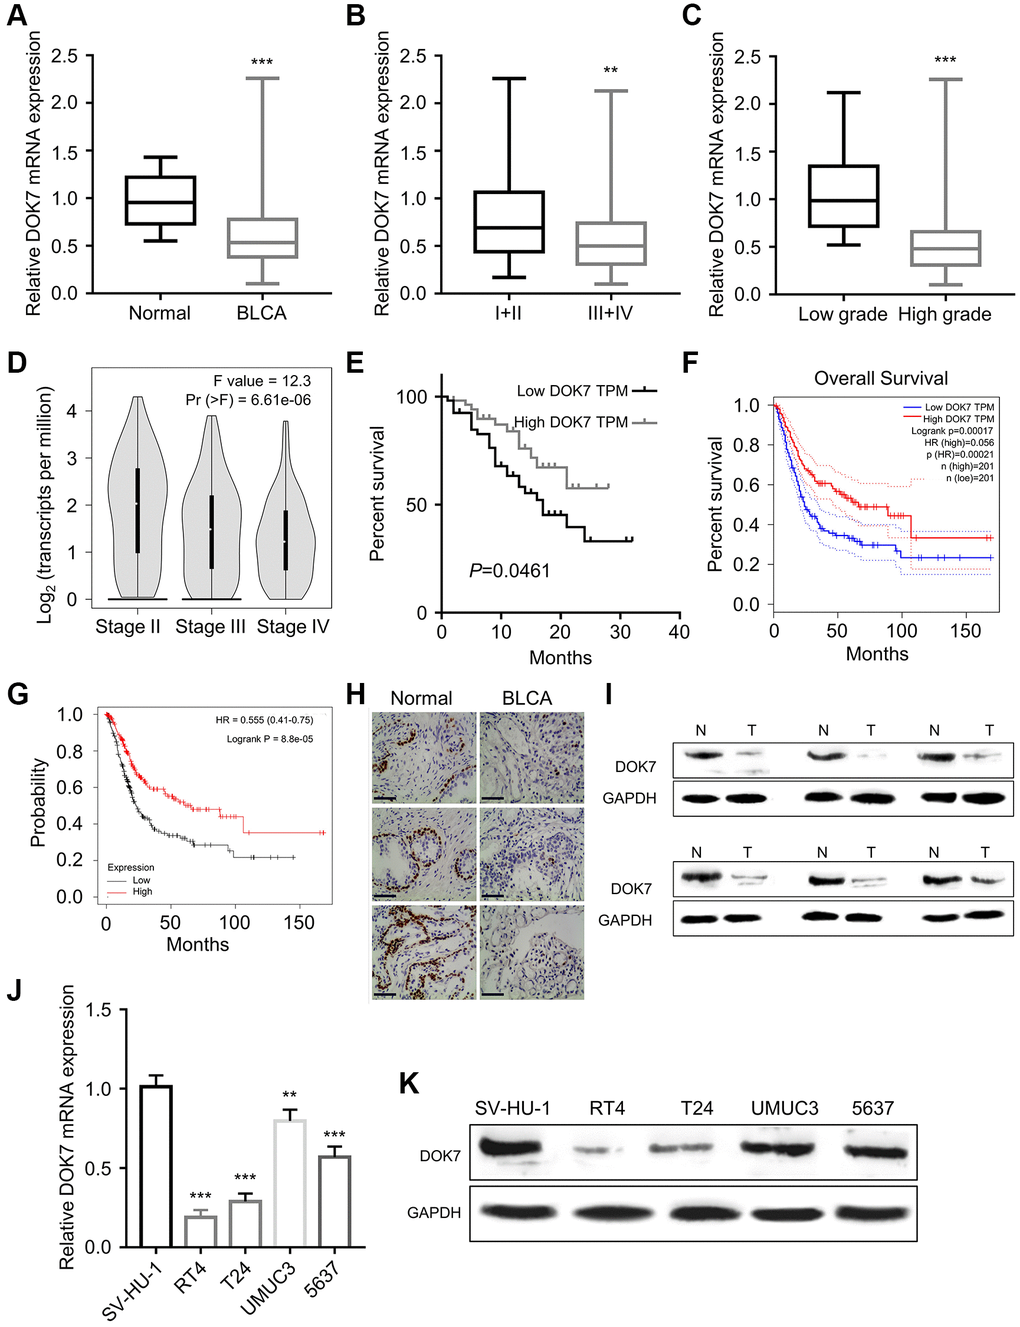 DOK7 expression is suppressed in BLCA tumor and cell lines. (A) The mRNA expression levels of DOK7 in 108 pairs of BLCA cancer tissues (BLCA) and corresponding adjacent tissues (Normal) were detected by RT-qPCR method. DOK7 expression was significantly decreased in BLCA, P  0.01; (B) The mRNA expression levels of DOK7 in BLCA tumor samples of different clinical stages (I+II and III+IV) were detected by RT-qPCR. DOK7 levels were significantly decreased in III+IV stage, P  0.01; (C) The expression levels of DOK7 in BLCA tumor samples of different histological grades (Low and High) were detected by qRT-PCR. DOK7 levels were significantly decreased in high grade tissues, P  0.001; (D) The expression levels of DOK7 in different clinical stages of TCGA-BLCA cancer tissues were analyzed by GEPIA. DOK7 levels were gradually decreased with the advancement of the clinical stage, P  0.001; (E) Kaplan–Meier (KM) curve analysis of the overall survival BLCA patients in DOK7 low-expression group (n = 54) and high-expression group (n = 54). The overall survival rate of the low-expression group was significantly lower than that of the high-expression group, P  0.001; (F) GEPIA online analysis of the TCGA BLCA cohort revealed the poor overall survival in BLCA patients with the low expression of DOK7; (G) K-M plotter online analysis found that the overall survival of BLCA patients with low expression of DOK7 was poor; (H) IHC staining of DOK7 protein expression levels in 3 pairs of cancer tissues and adjacent normal tissues under the magnification of 200X. DOK7 expression was significantly reduced in BLCA tumor tissues. The DOK7 staining was seen as dark signal in the nuclei, scale bar: 200 μm; (I) The protein levels of DOK7 in 6 pairs of BLCA cancer tissues and normal tissues were detected by WB. DOK7 protein levels were decreased in BLCA cancer tissues; (J) DOK7 mRNA expression levels in BLCA cell lines (RT4, T24, and UMUC3, 5637) and normal bladder cell line (SV-HU-1) were detected by RT-qPCR; (K) WB detection of DOK7 protein expression levels in BLCA cell lines and normal bladder cell line. **P ***P 